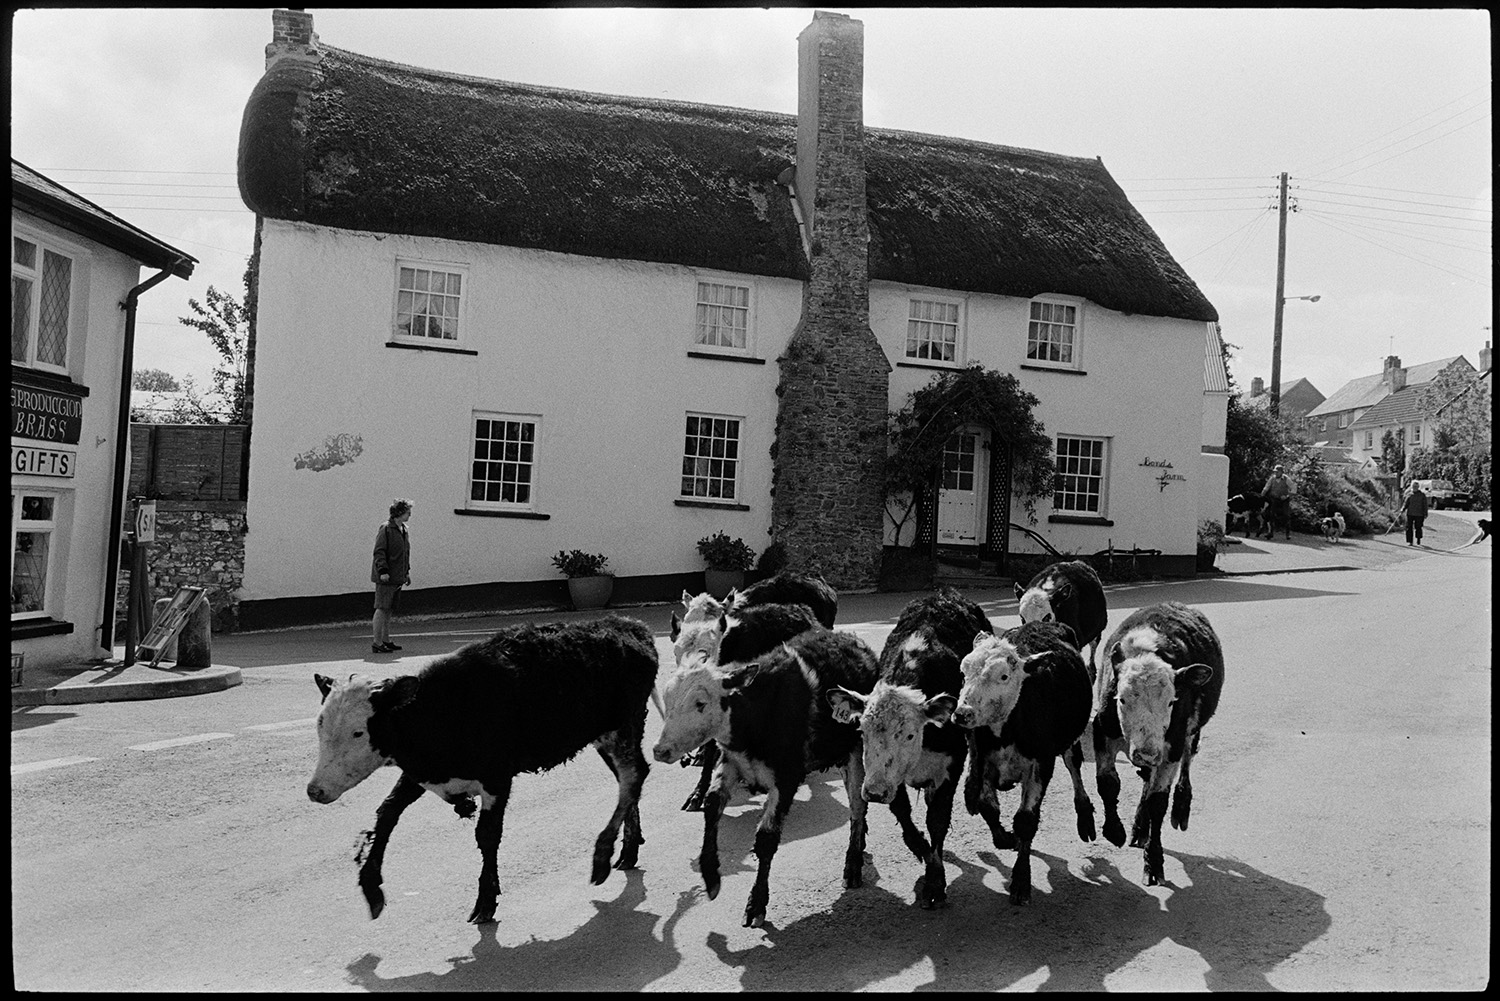 Cows going through village milk stand under tree.
[Young cattle being driven down a street past the thatched farmhouse of Bonds Farm in Atherington. A stone chimney is running up the middle of the farmhouse building.]